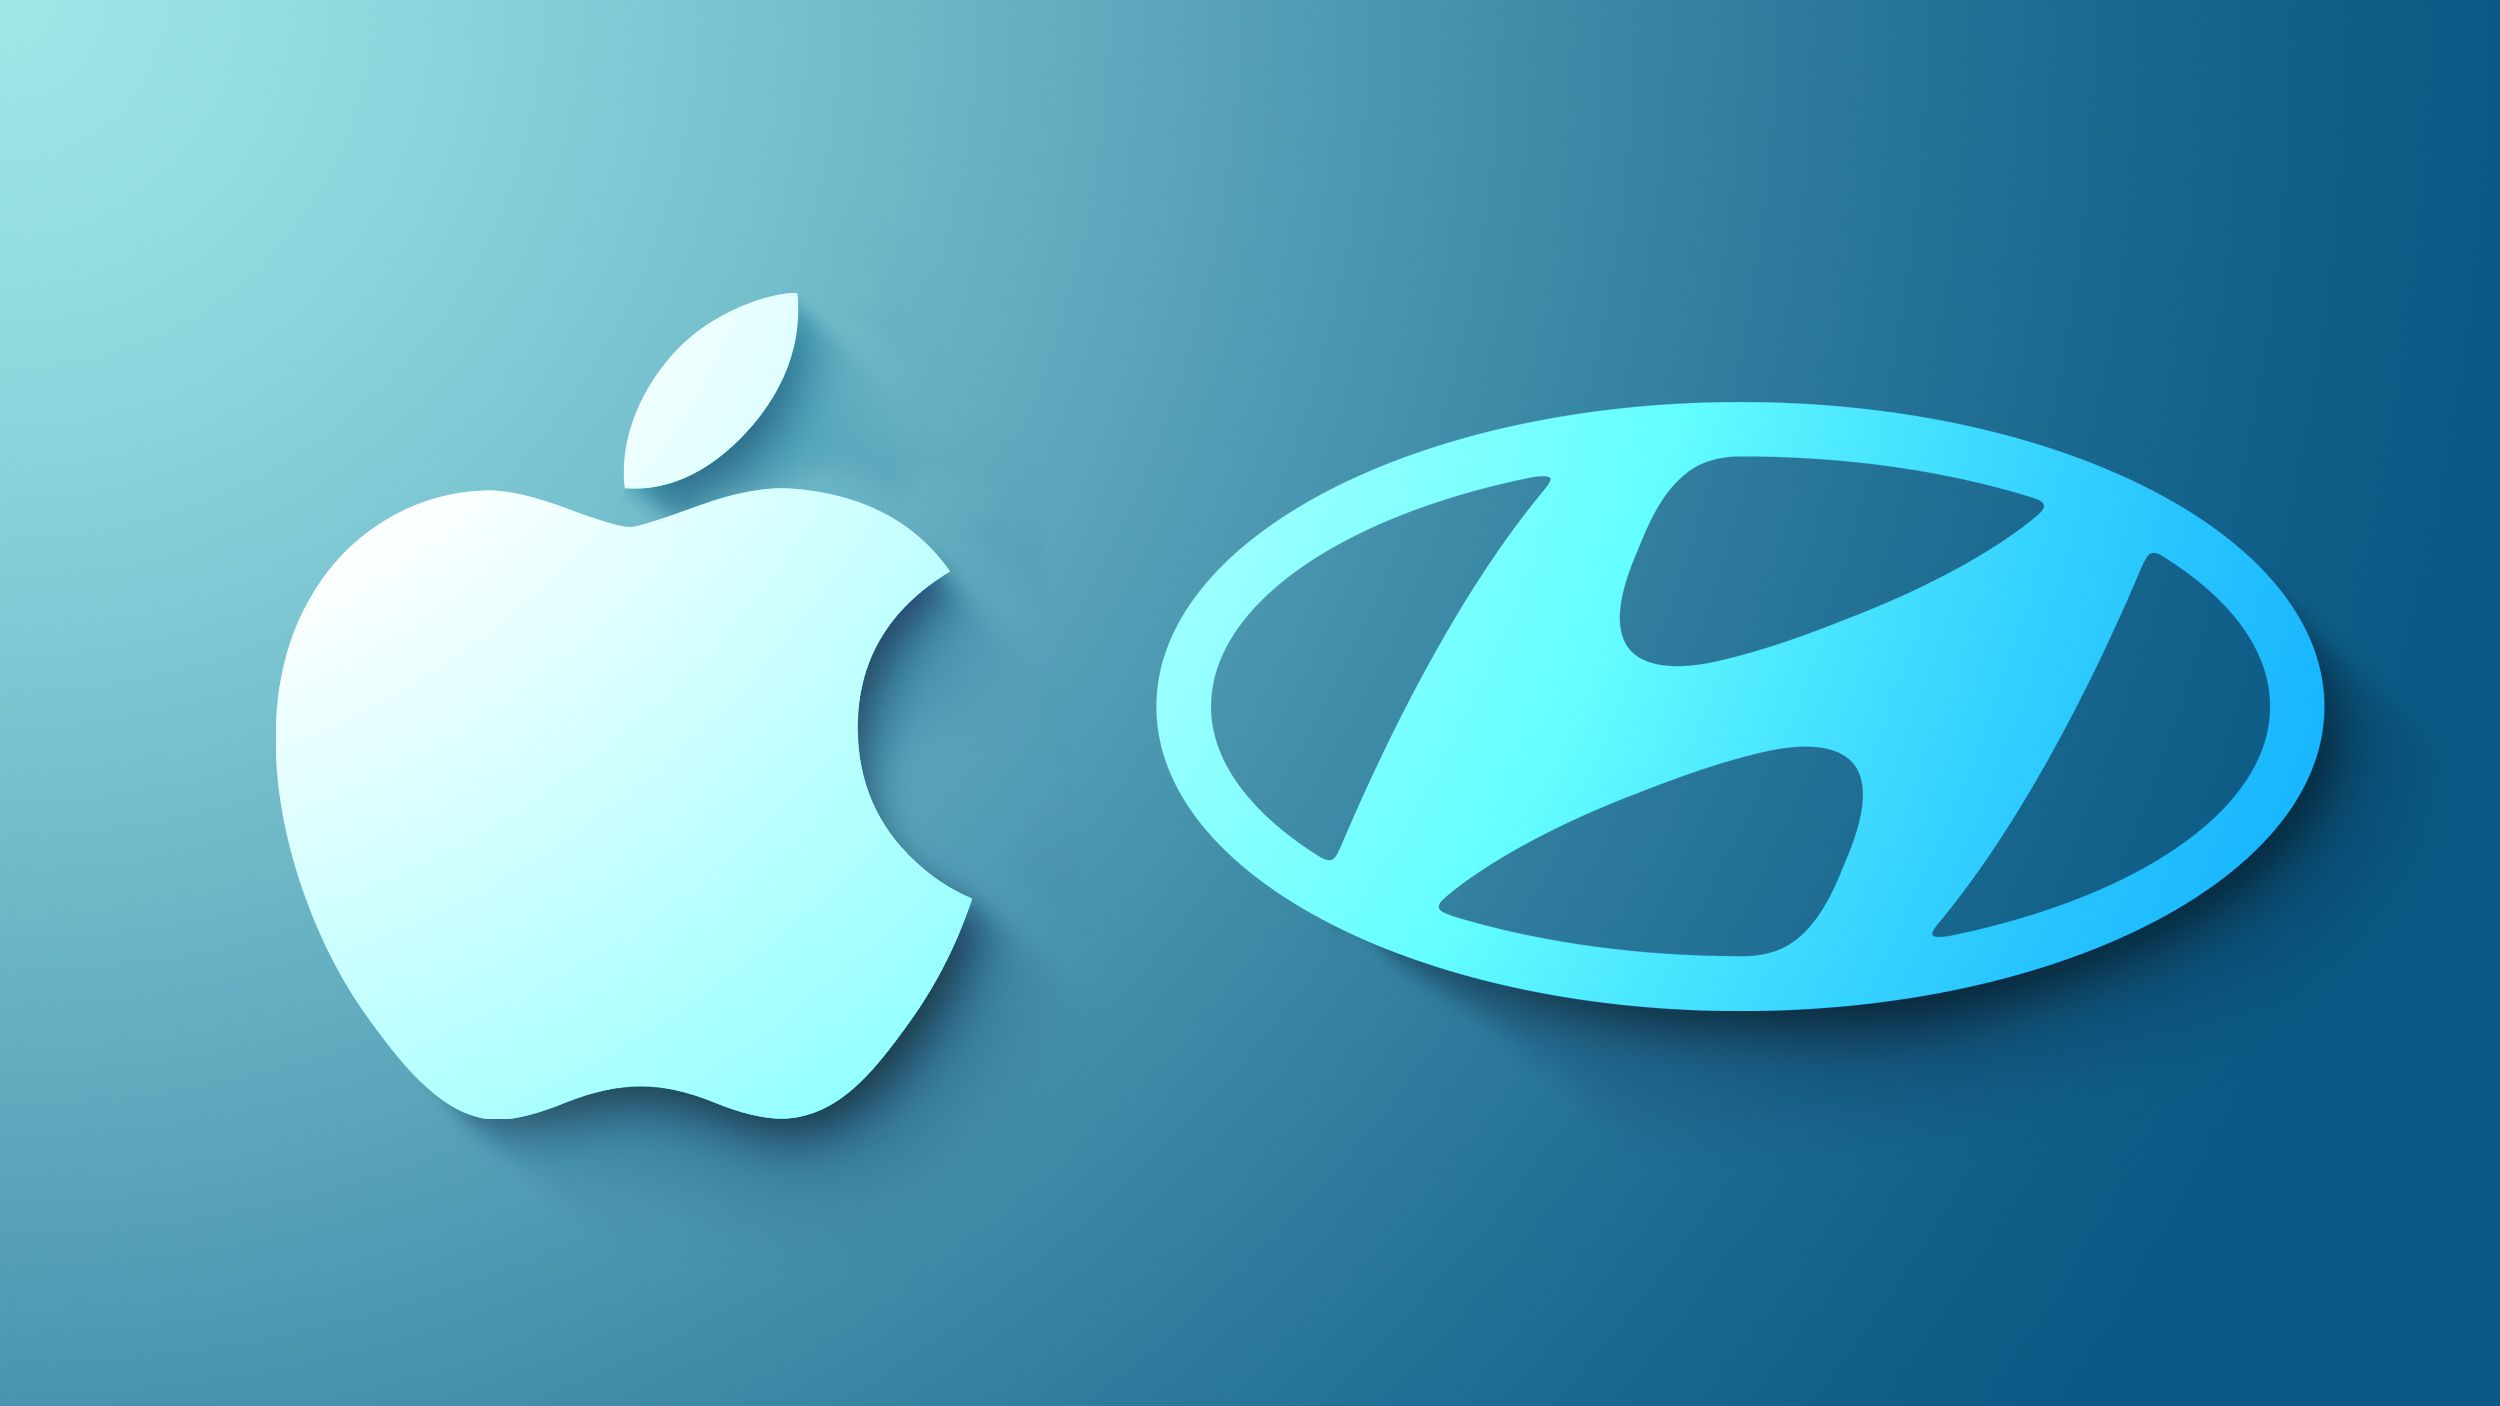 Apple and Hyundai sign an Apple auto deal by March with production to begin in 2024